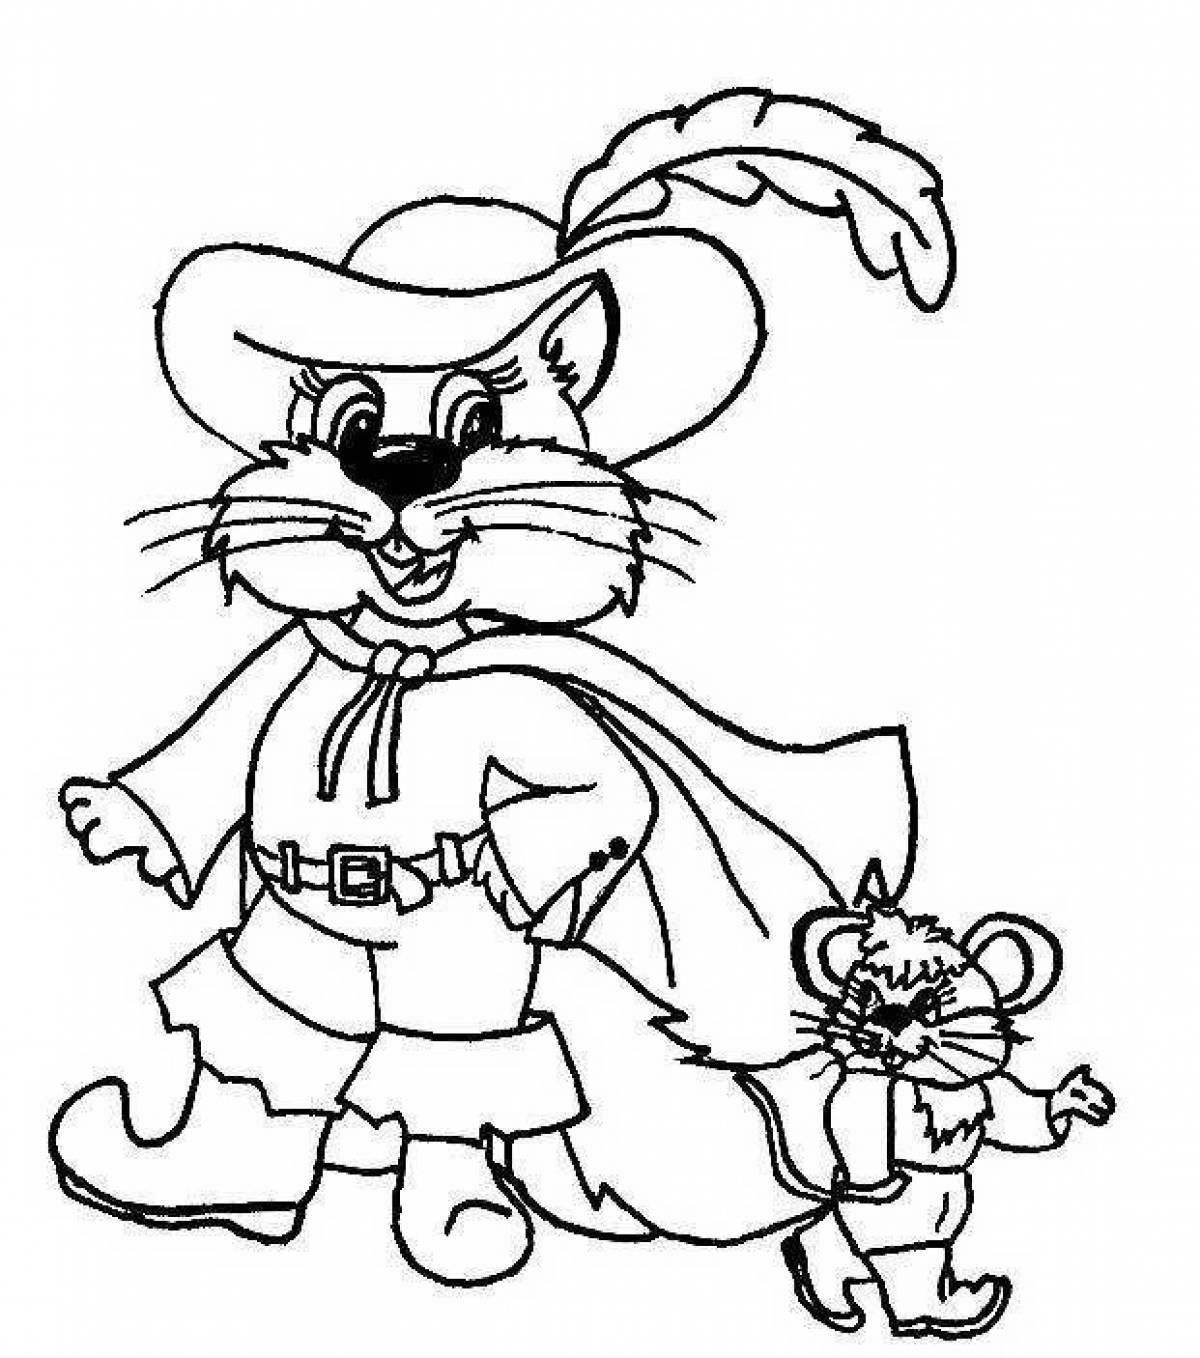 Charles perrault's tempting pussy in boots coloring book